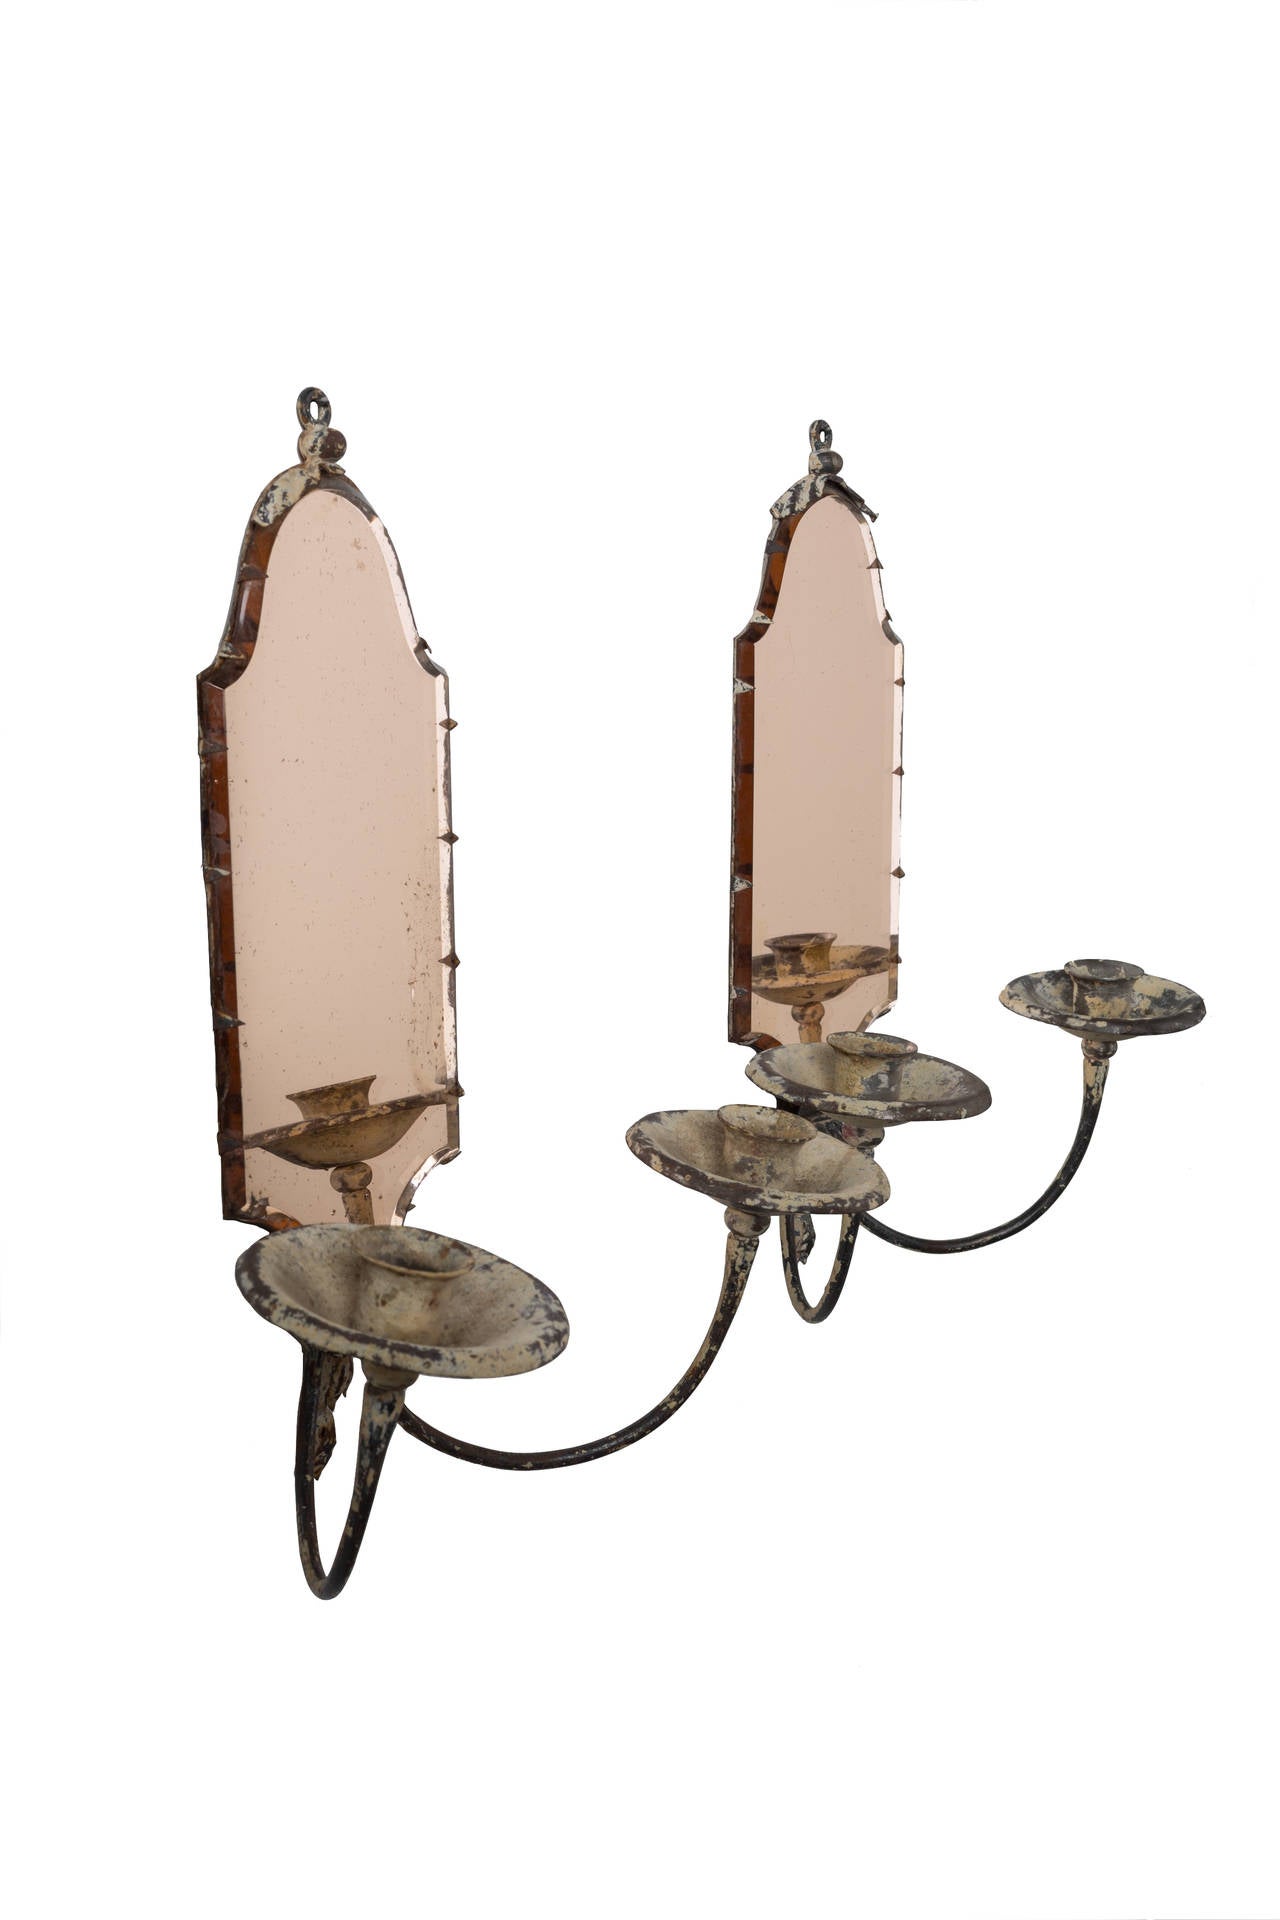 19th century pair of sconces with rose gold color mirror and antique white patina metal. Wonderful romantic addition to you walls in a ladies boudoir, dressing or powder room. Could also look lovely in a nursery or young girls bedroom. Beautiful